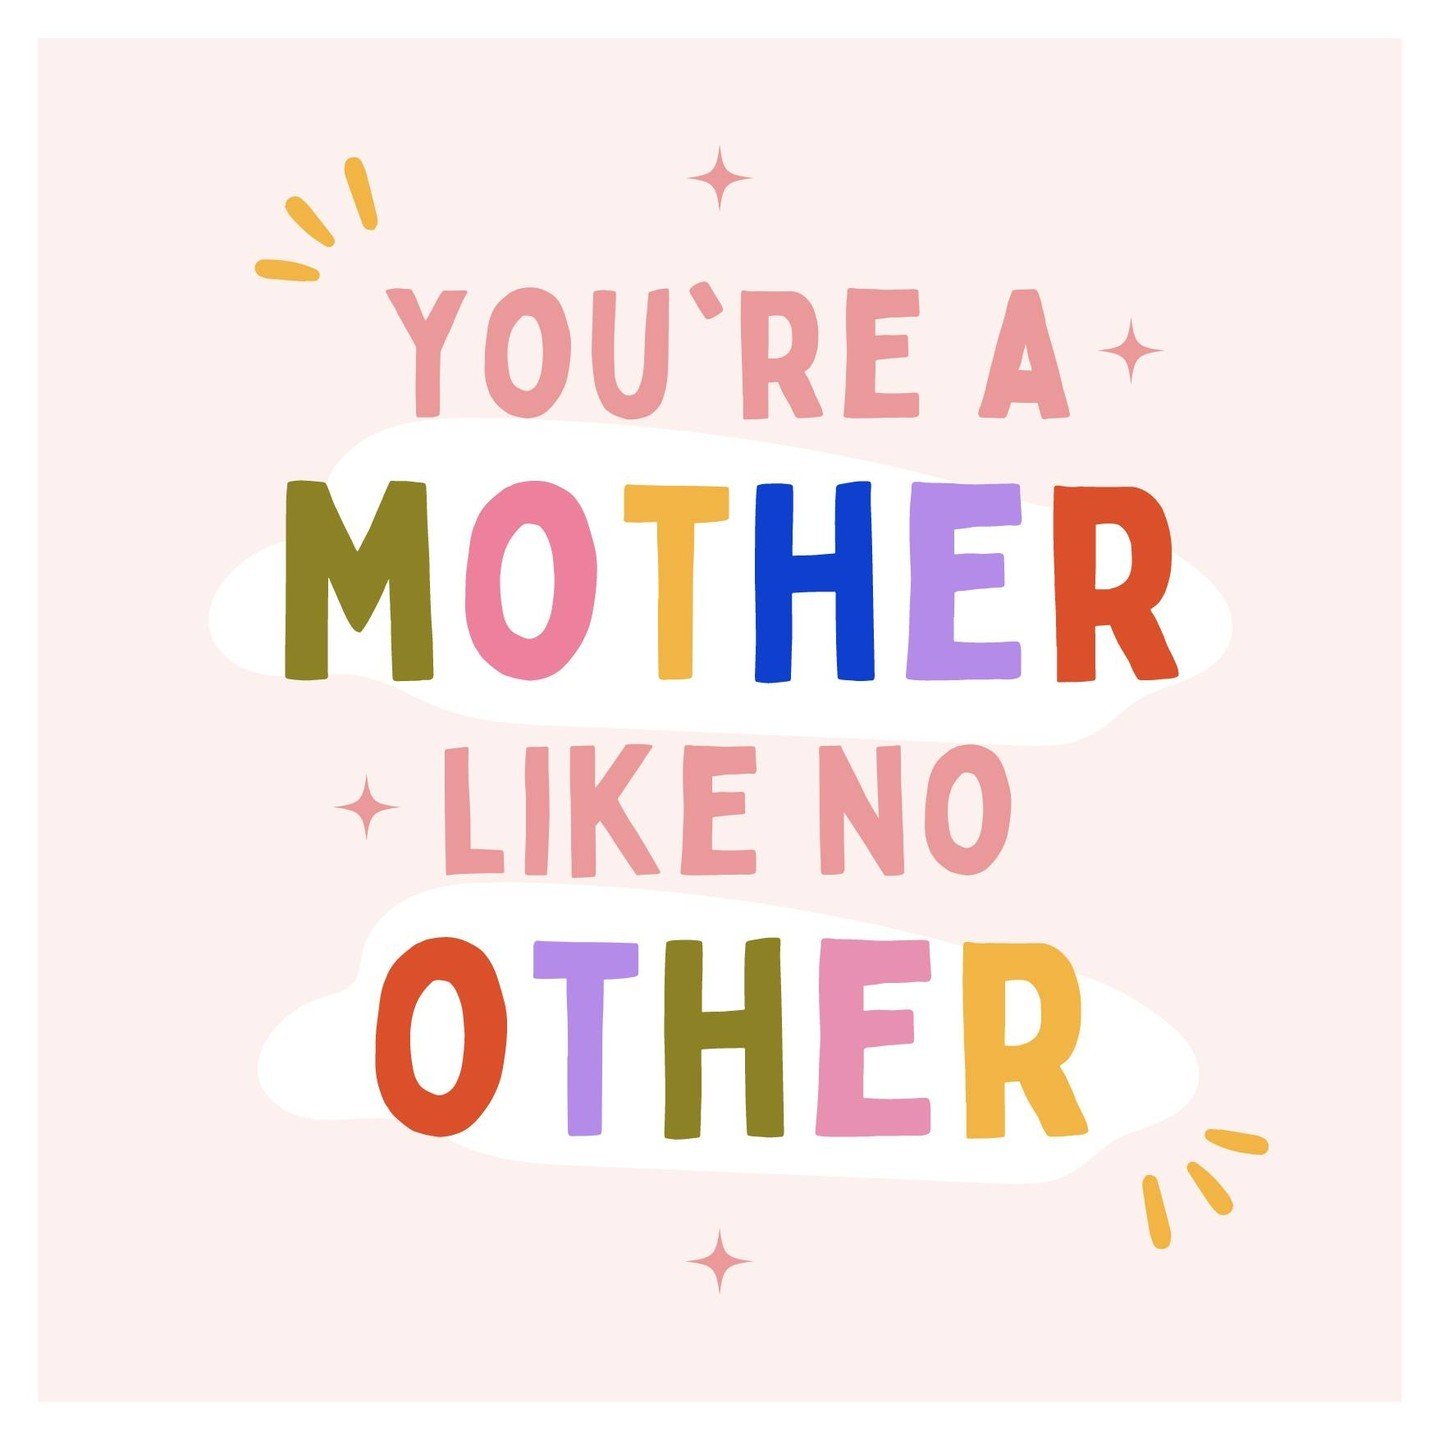 Happy Mother's Day! 💐😍⁠
⁠
We wish a happy Mother's Day to all the moms, step-moms, mothers-in-law, godmothers and motherly figures out there! 💓 ⁠
⁠
#SoGranville⁠
#TreatYourMom⁠